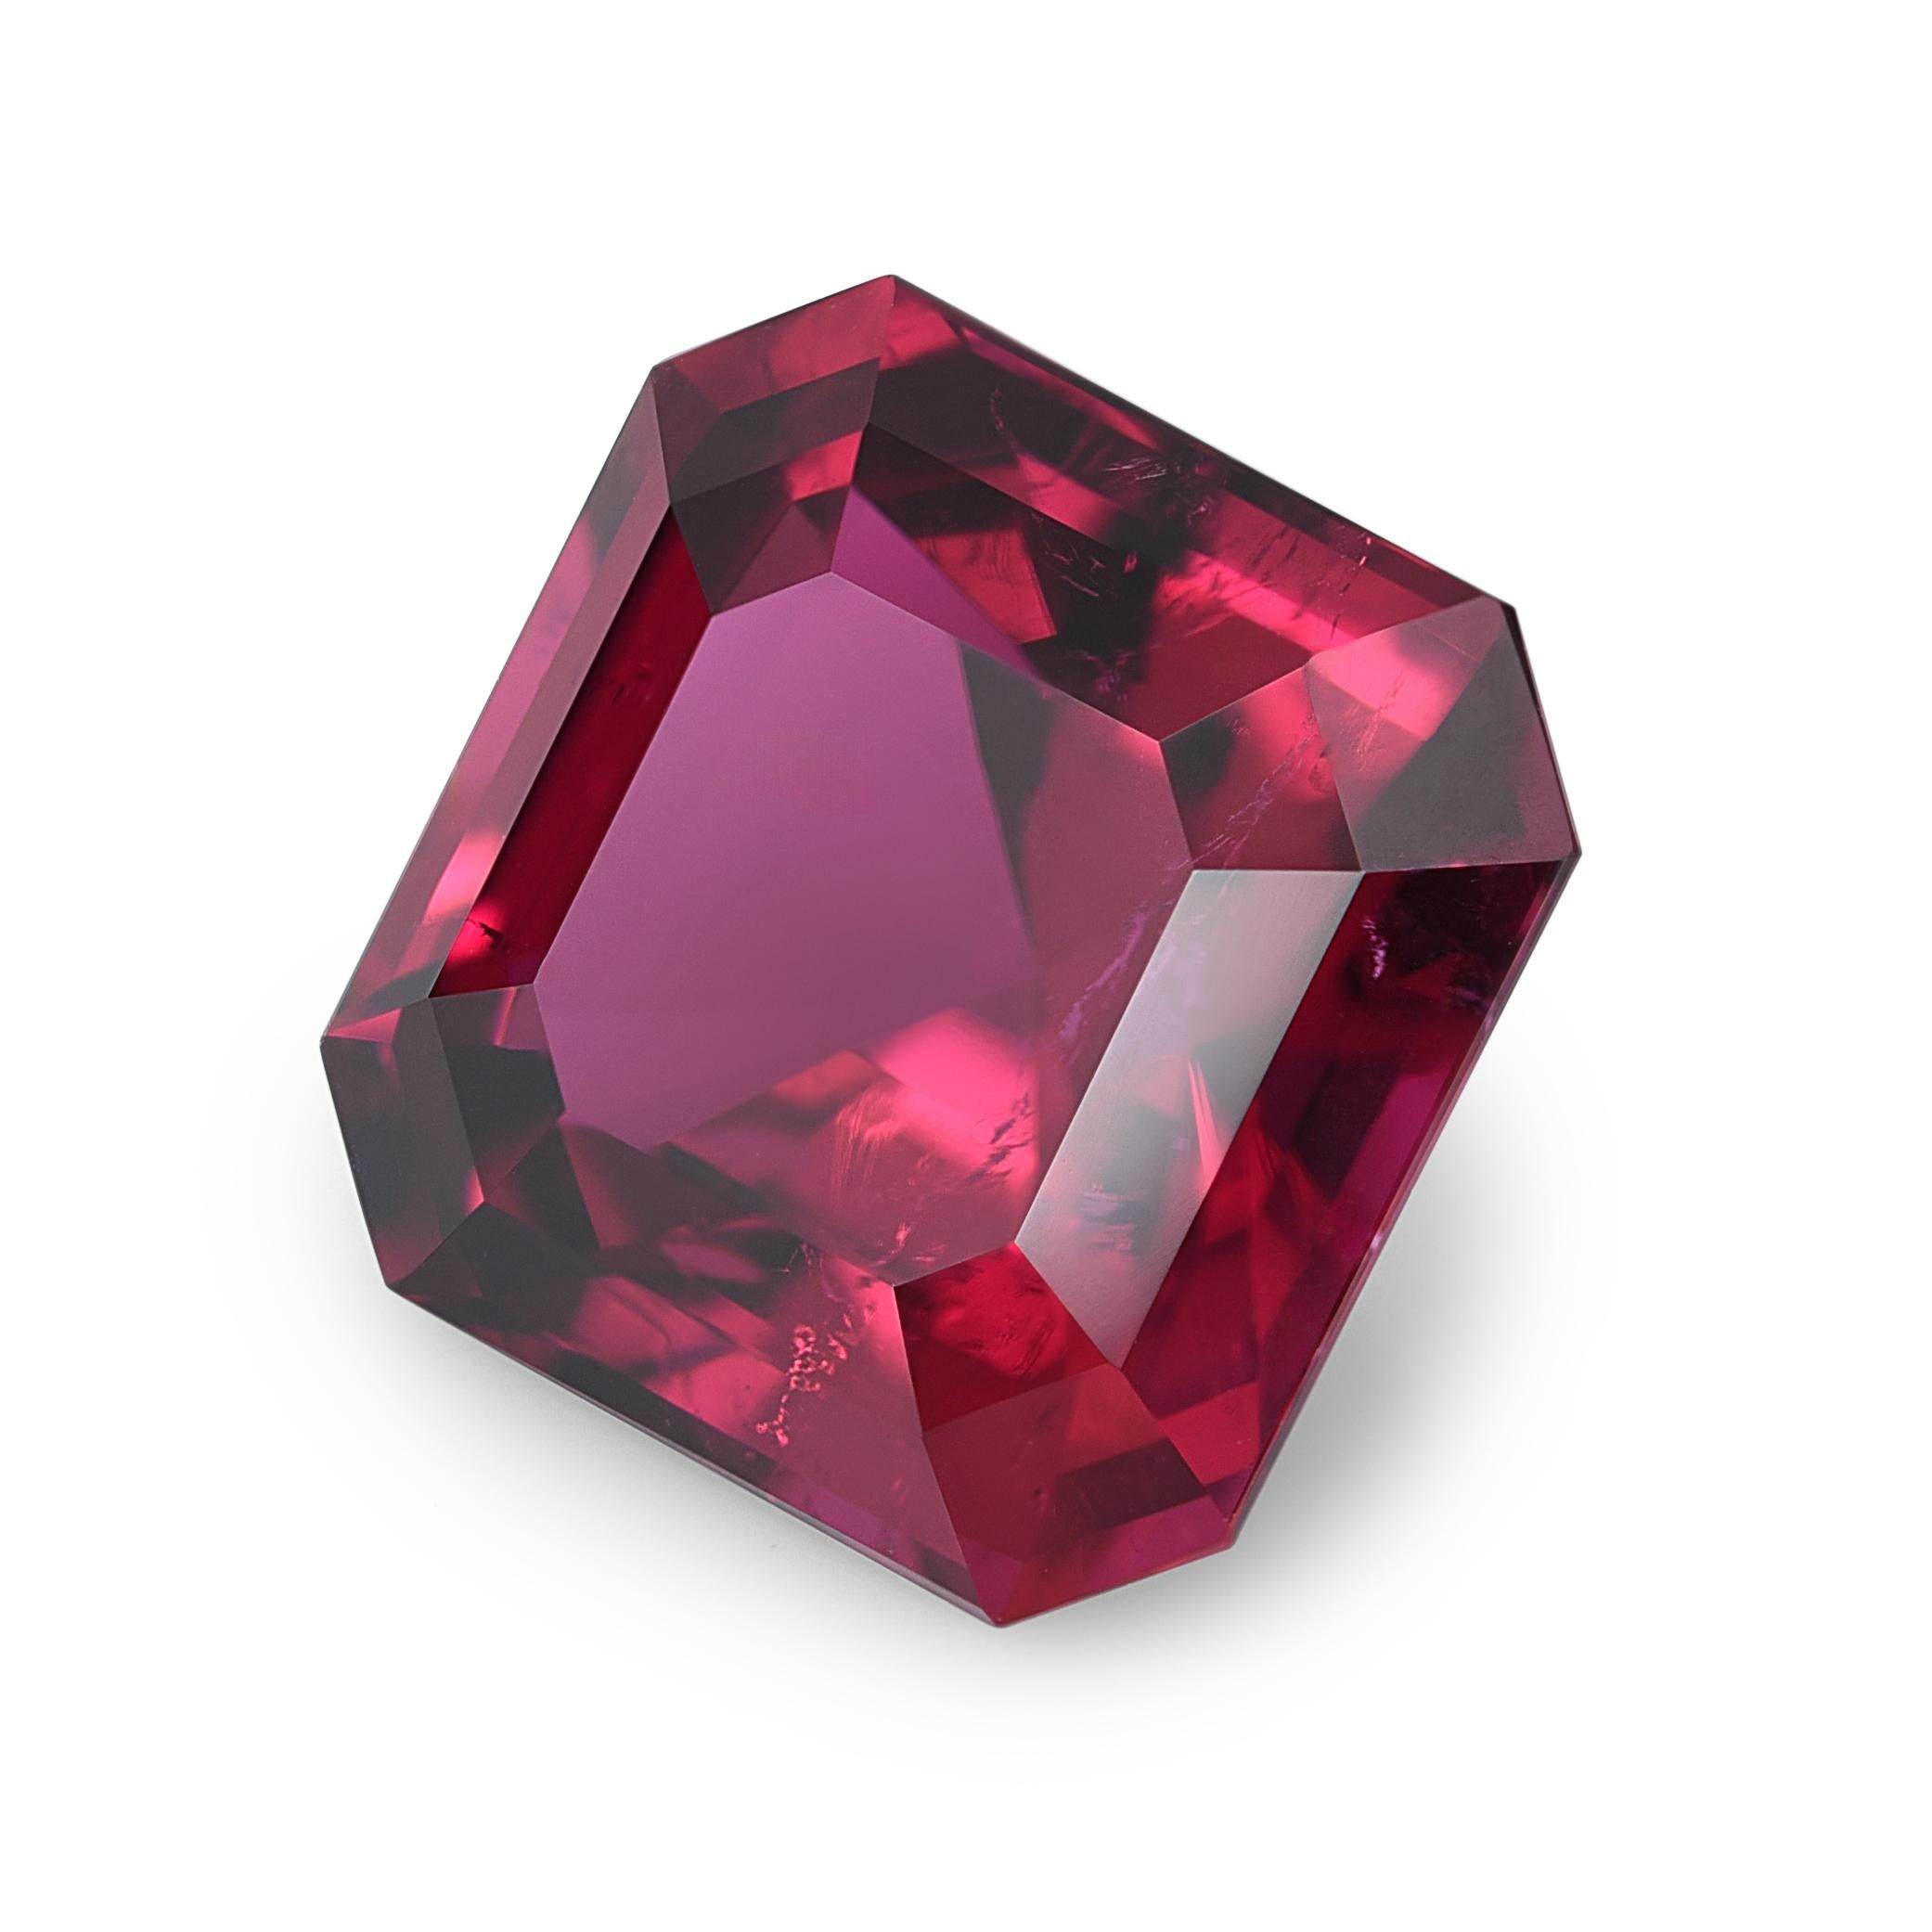 This exquisite Natural Red Tourmaline boasts a cushion cut, showcasing dimensions of 11.91 x 11.90 x 7.99 mm. With a substantial weight of 7.81 carats, this gemstone captivates with its vibrant red hue. The cushion cut, characterized by rounded